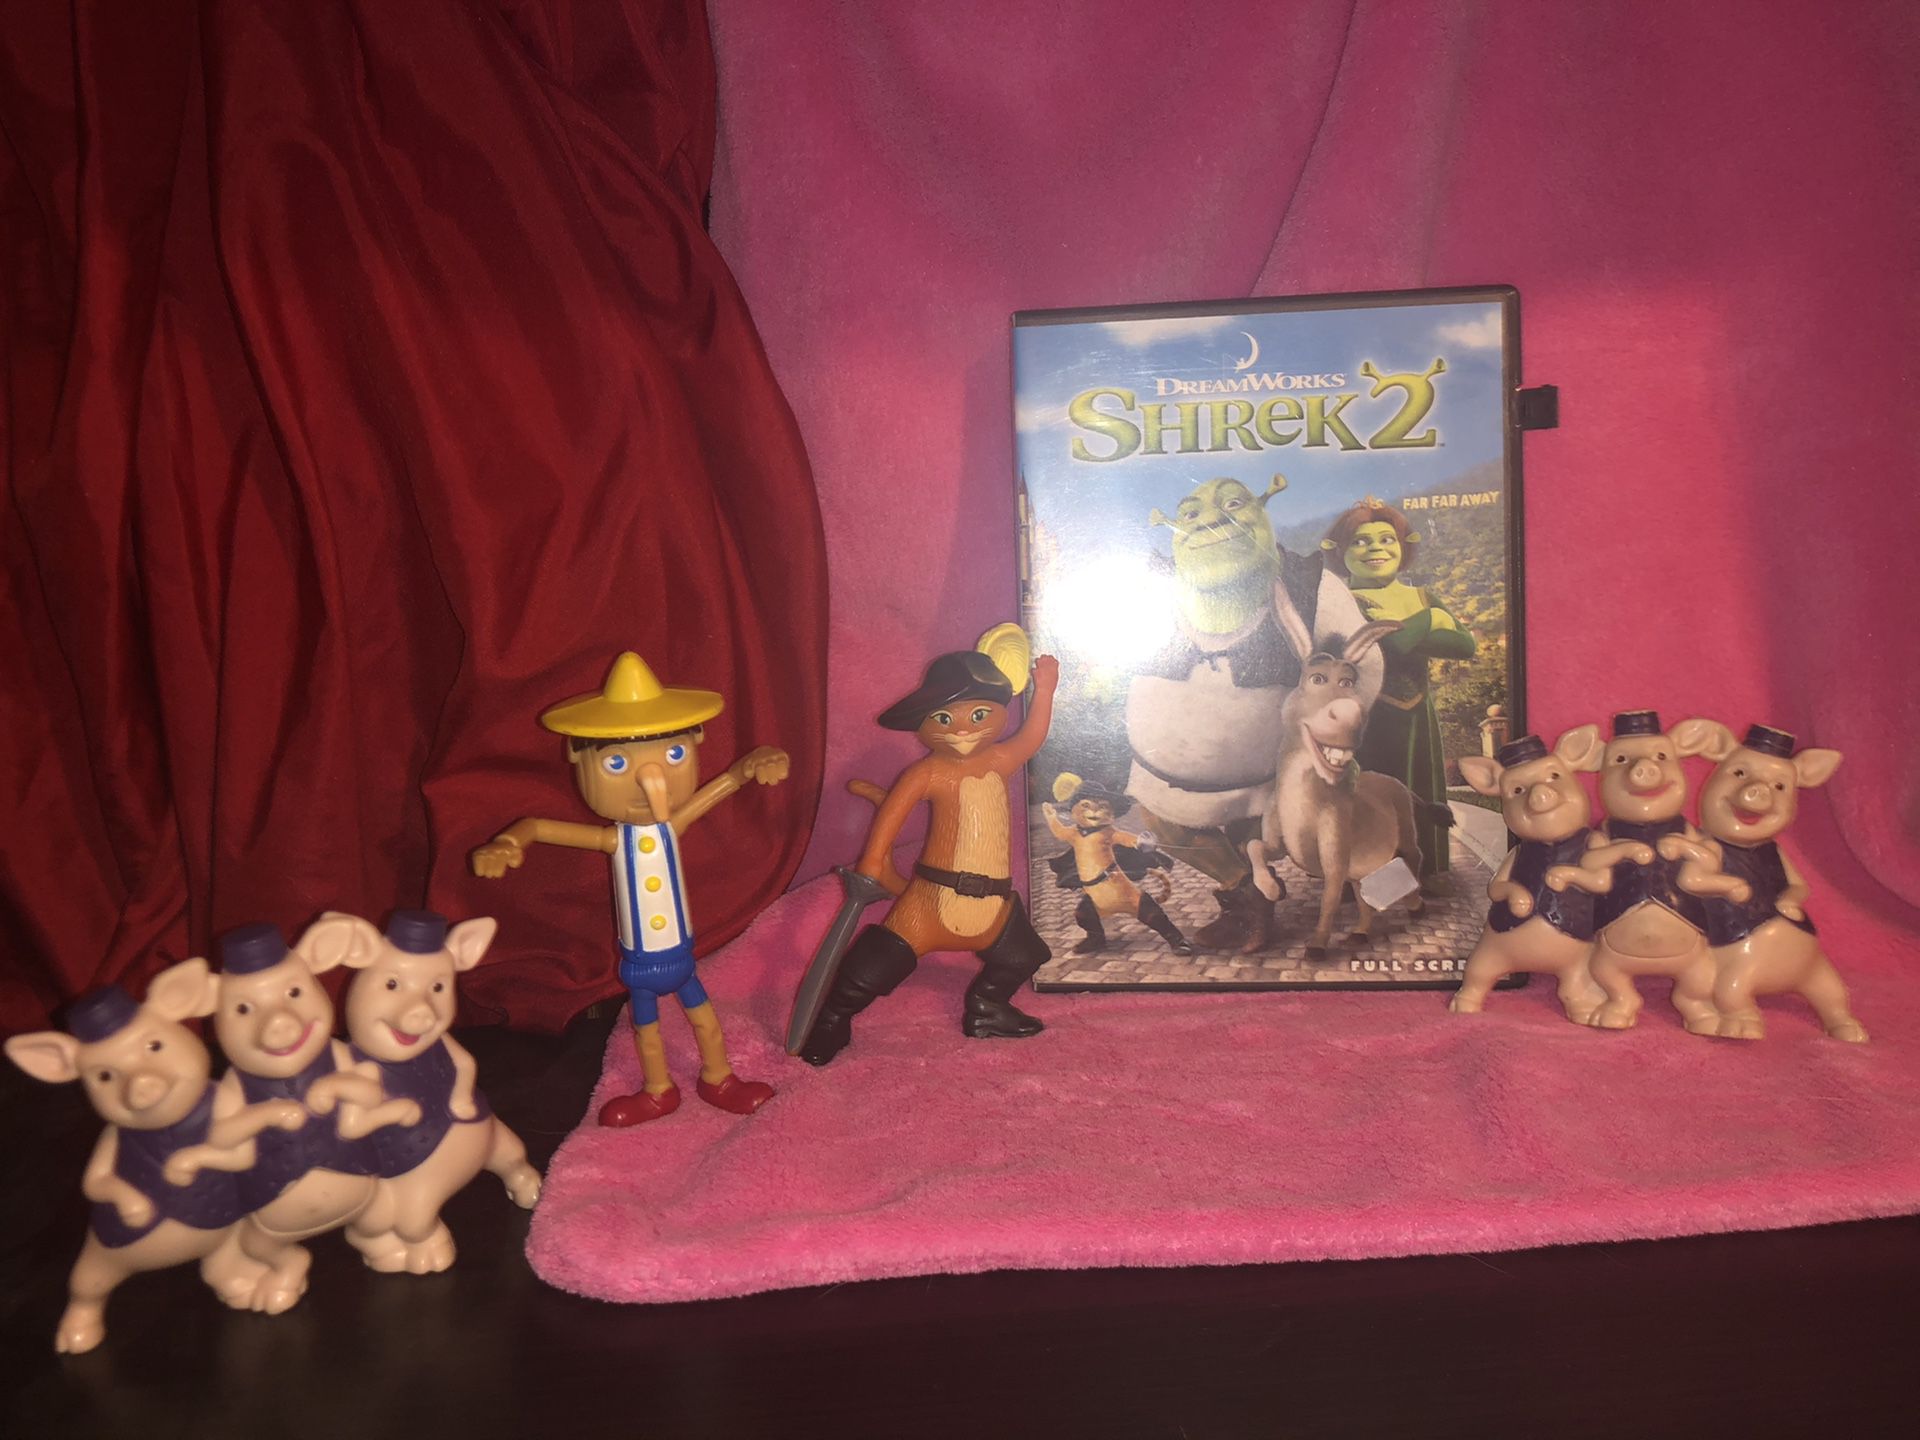 Shrek Lot sale ! Zorro the cat, Pinocchio, three little pigs happy meal toy figurines and Shrek 2 DVD lot sale!